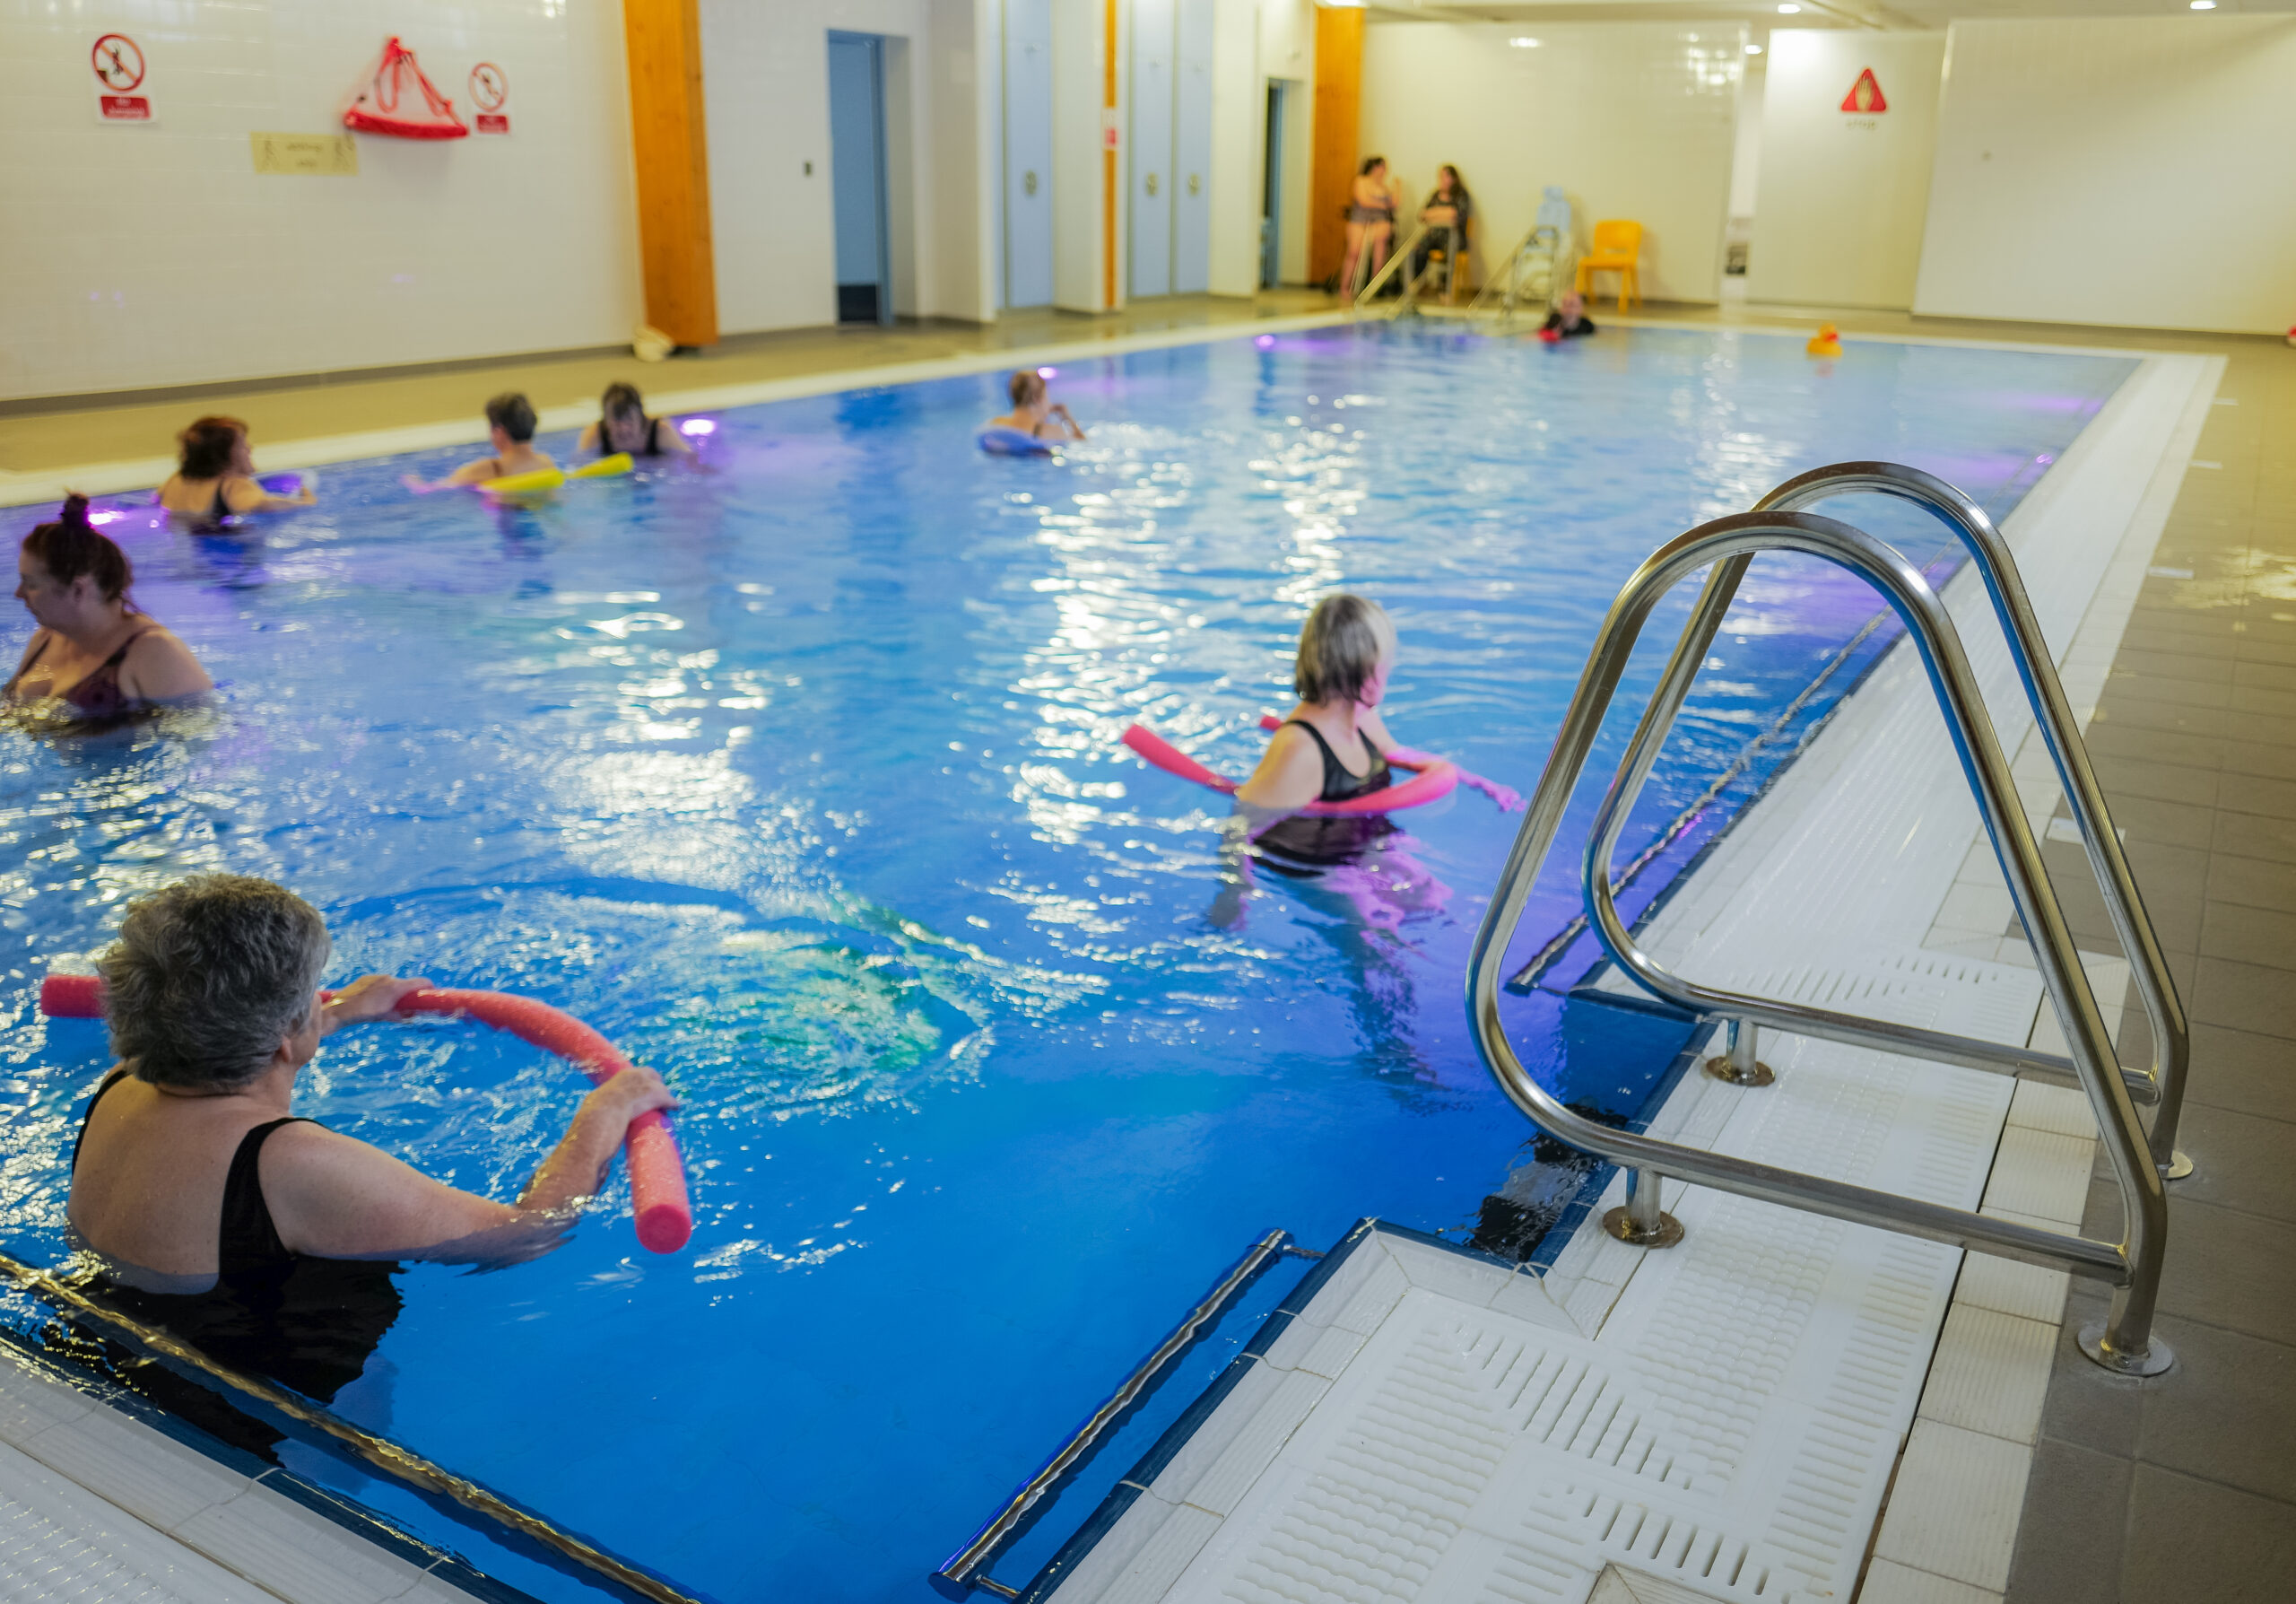 Large hydrotherapy pool with adults and children in the water